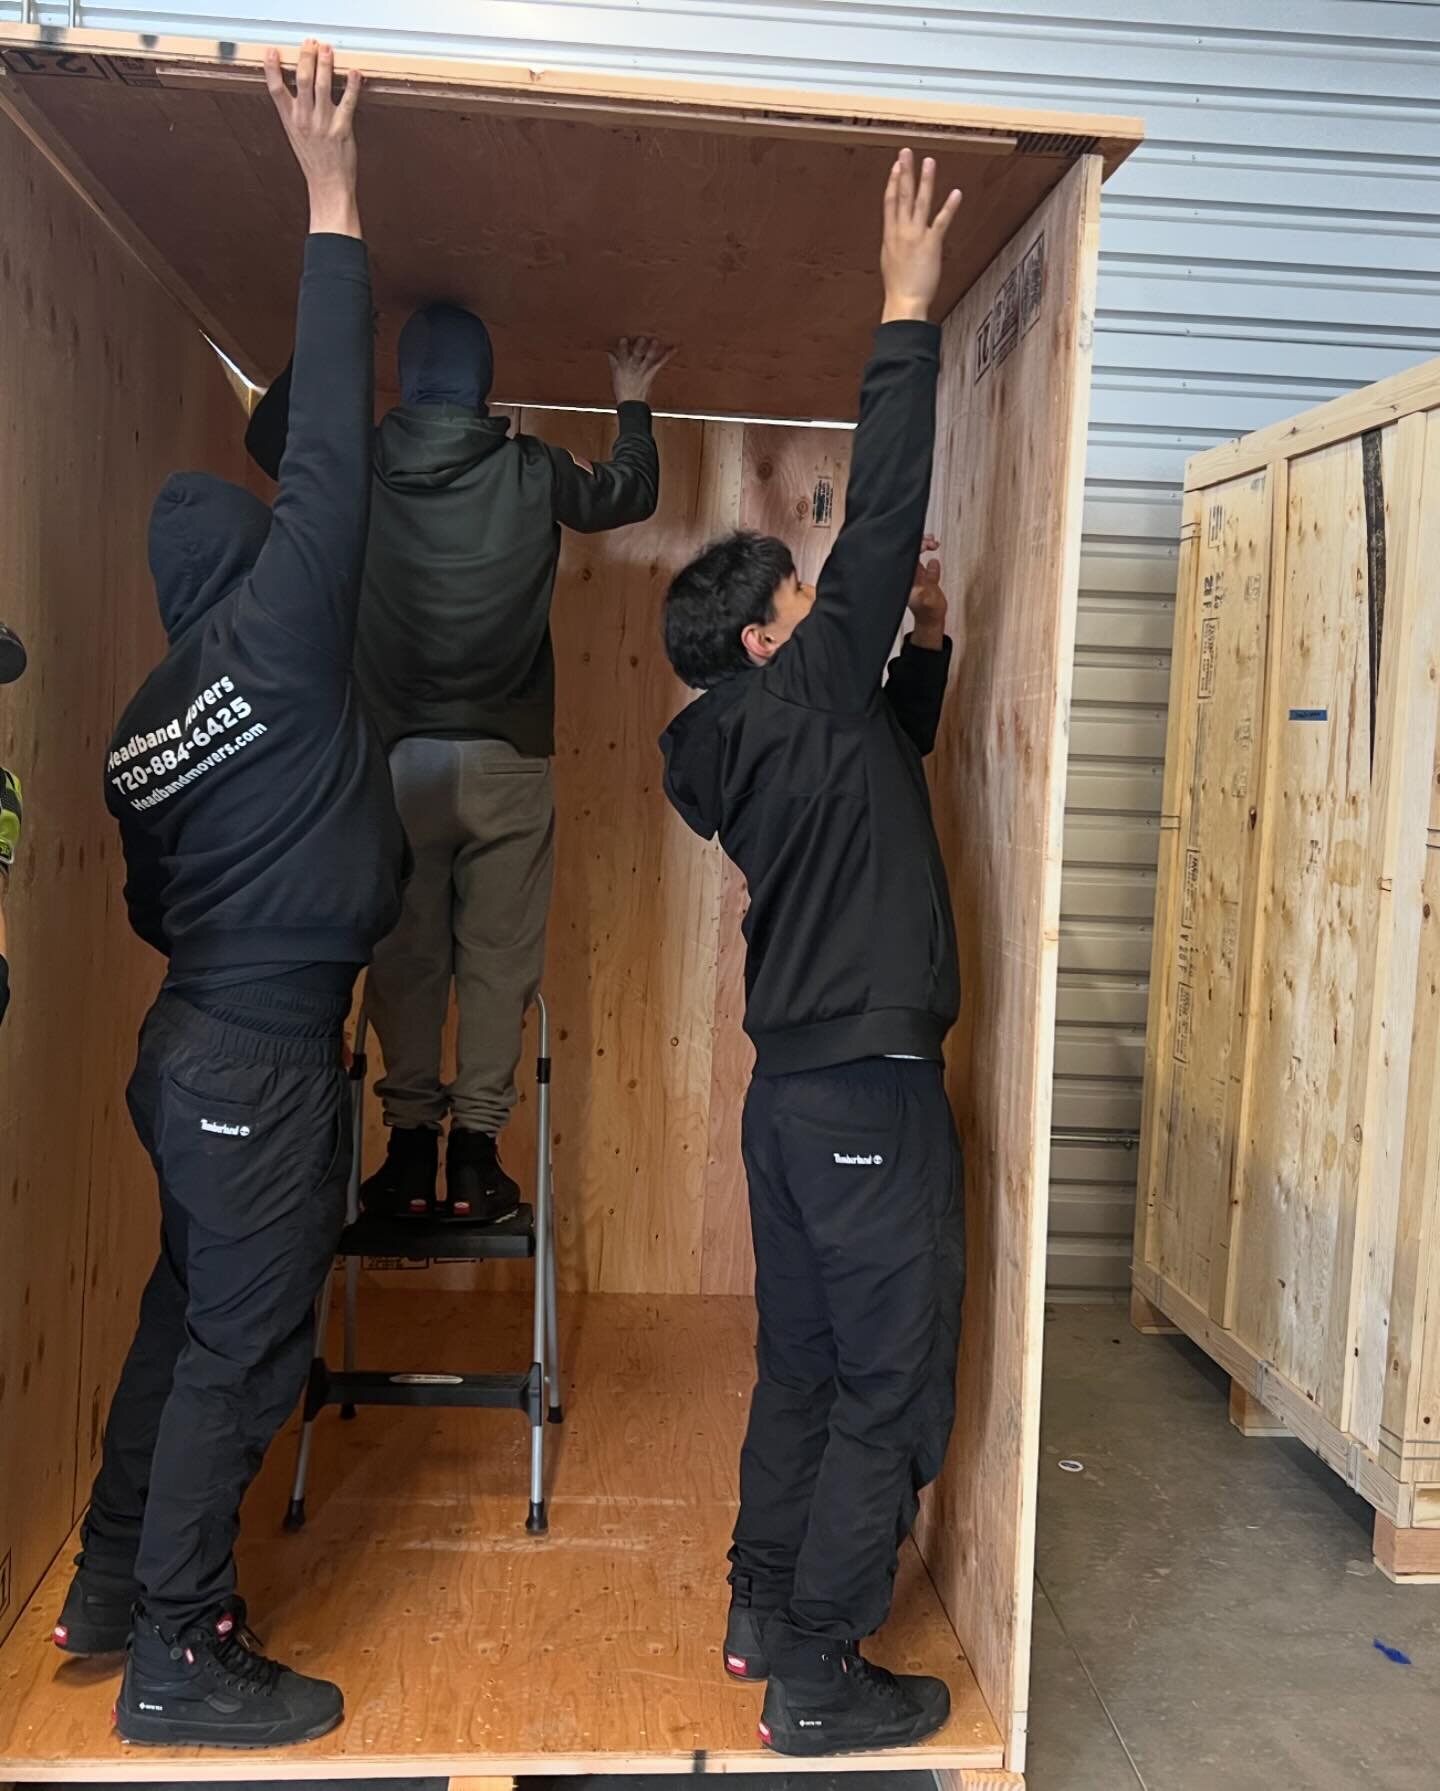 📦 Looking for Long-Term Storage Solutions? 🏠

At Headband Movers, we understand that finding a reliable place to store your belongings for the long haul can be stressful. That&rsquo;s why we&rsquo;re proud to offer our specialized Vaulting Services